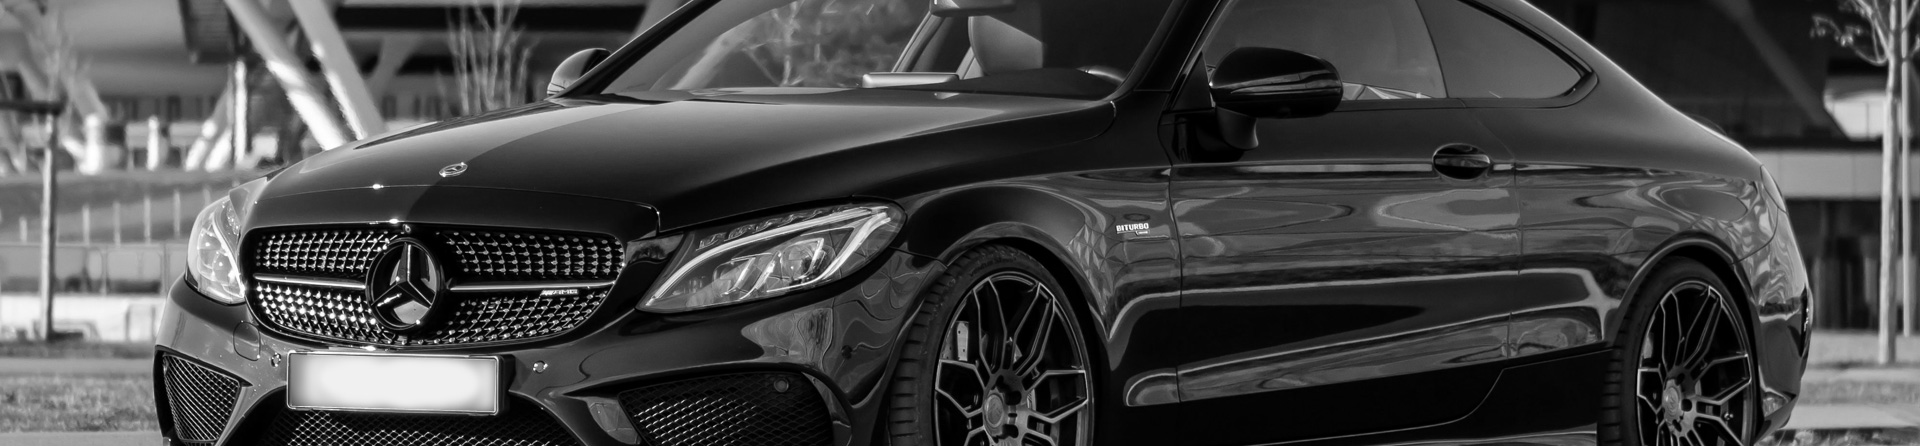 Luxury Car Service in Vancouver